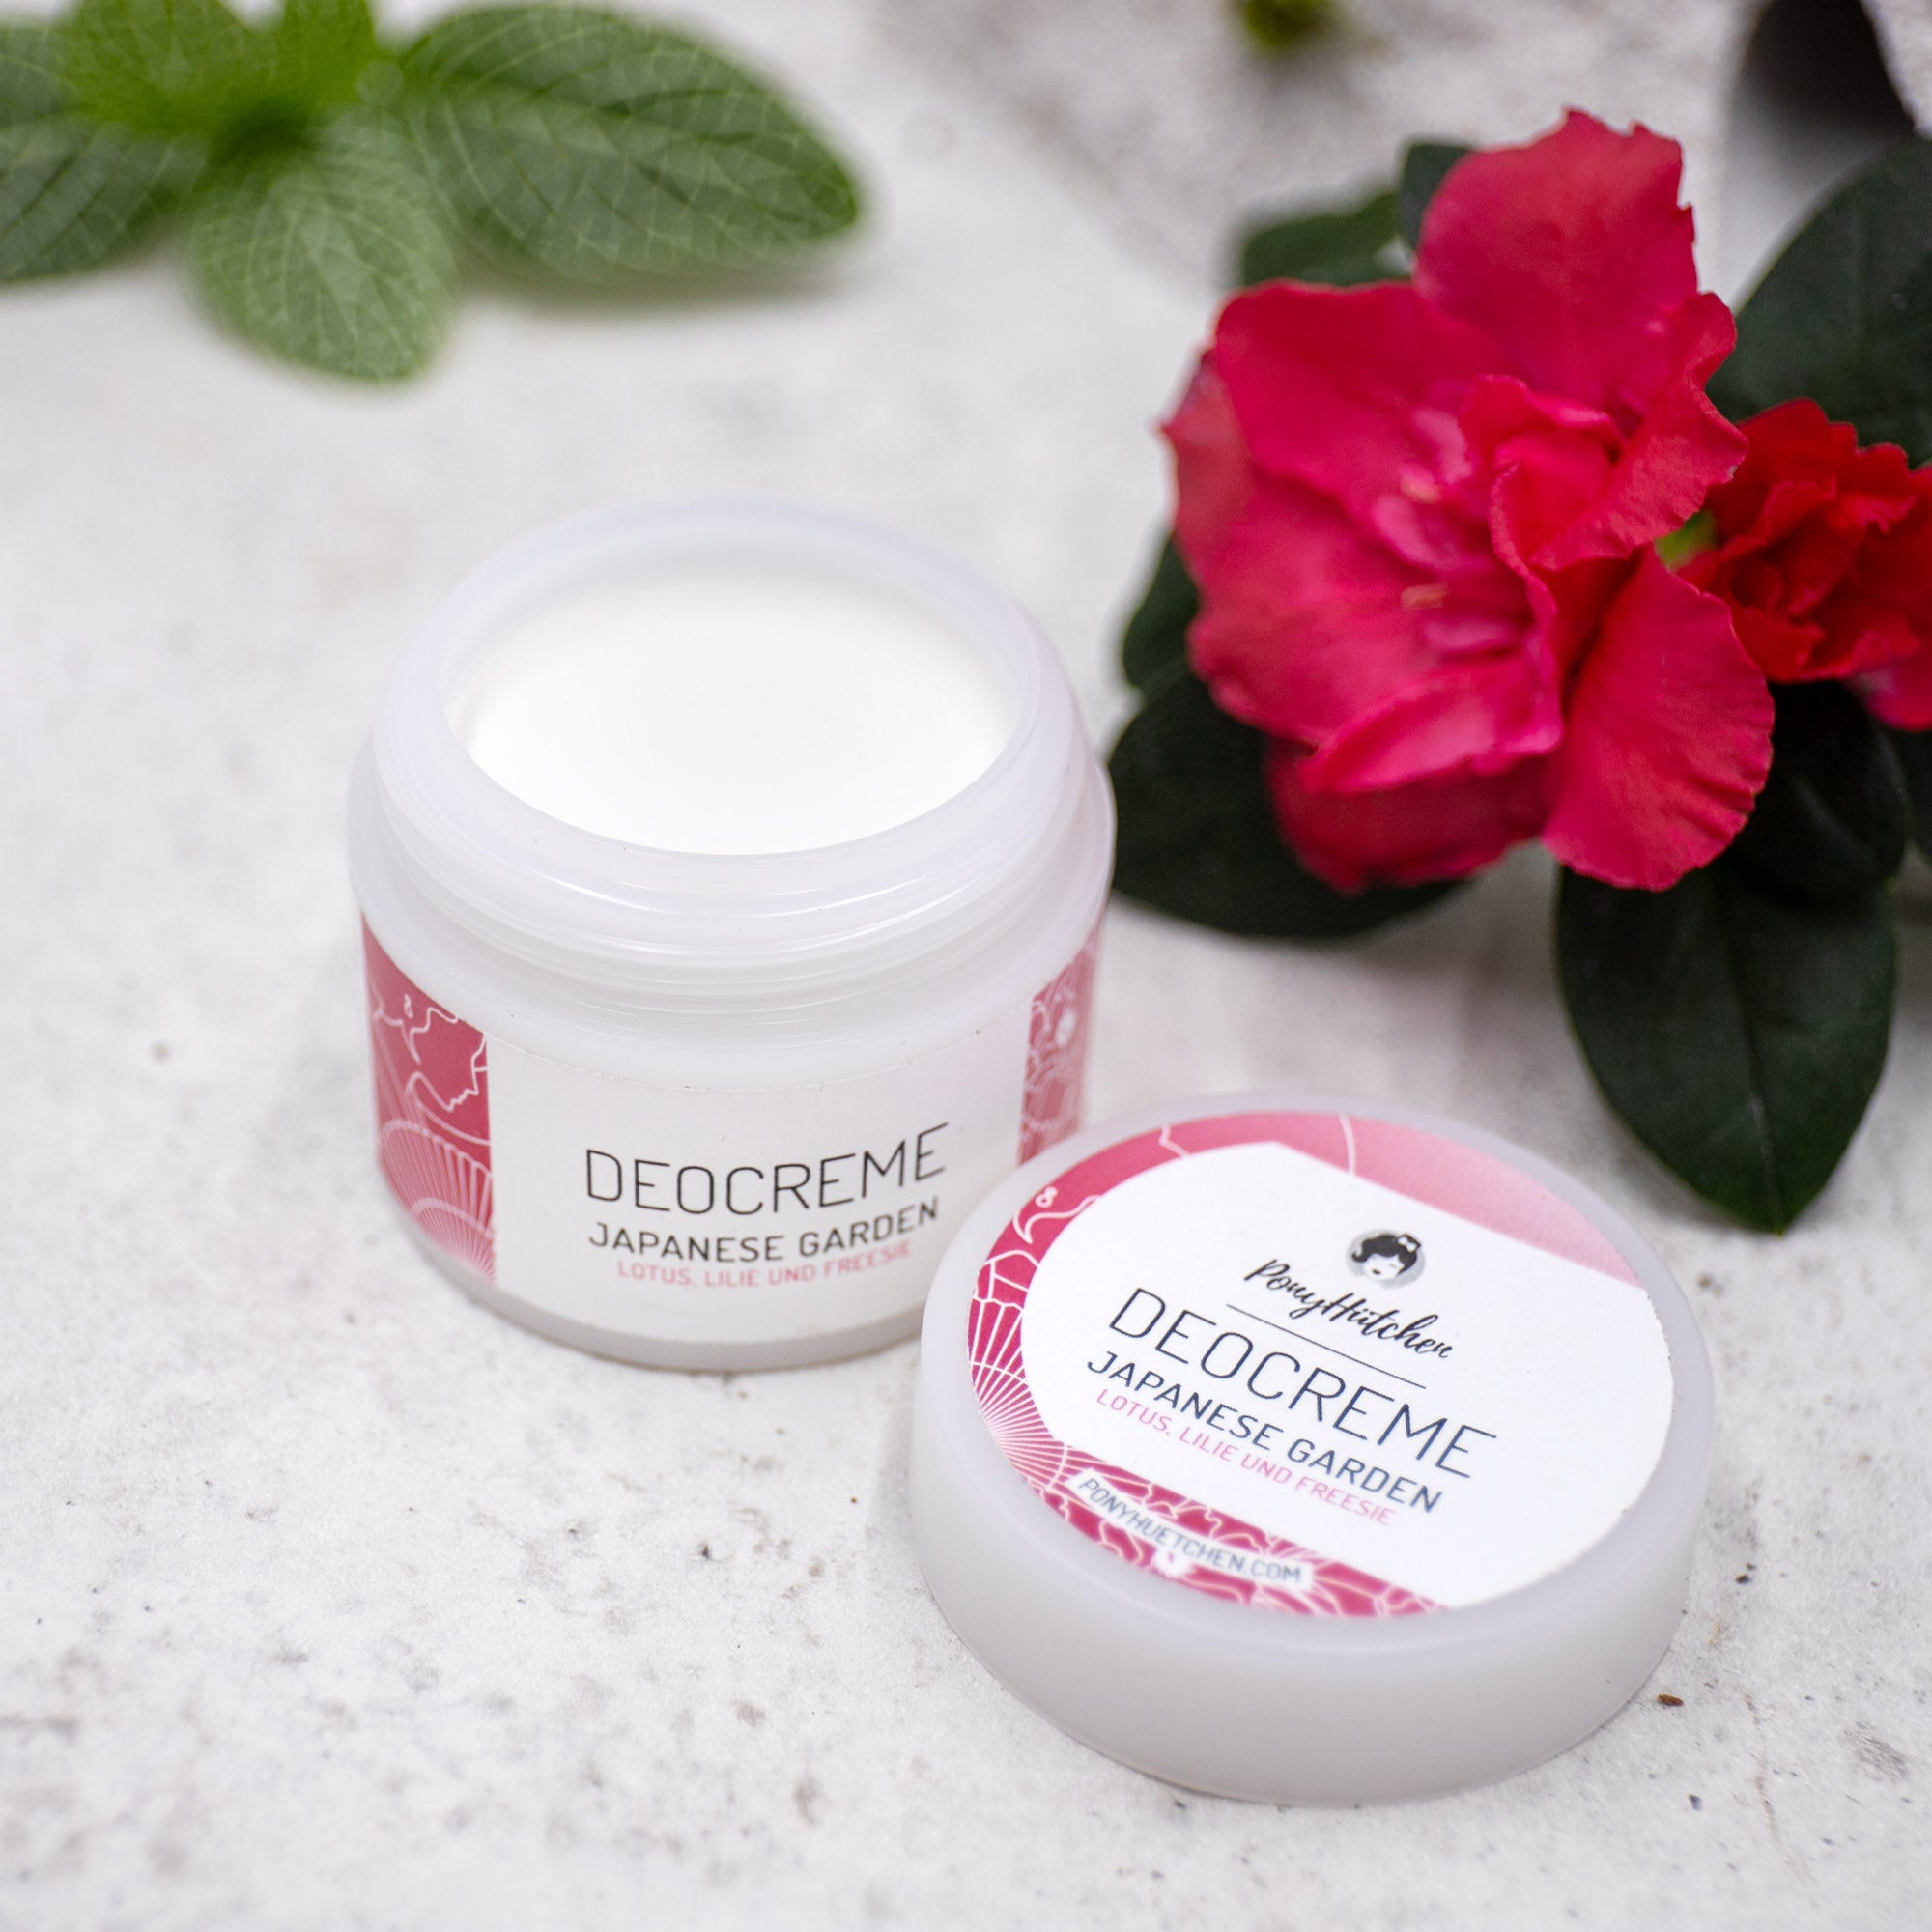 Deocreme Japanese Garden - Limited Edition